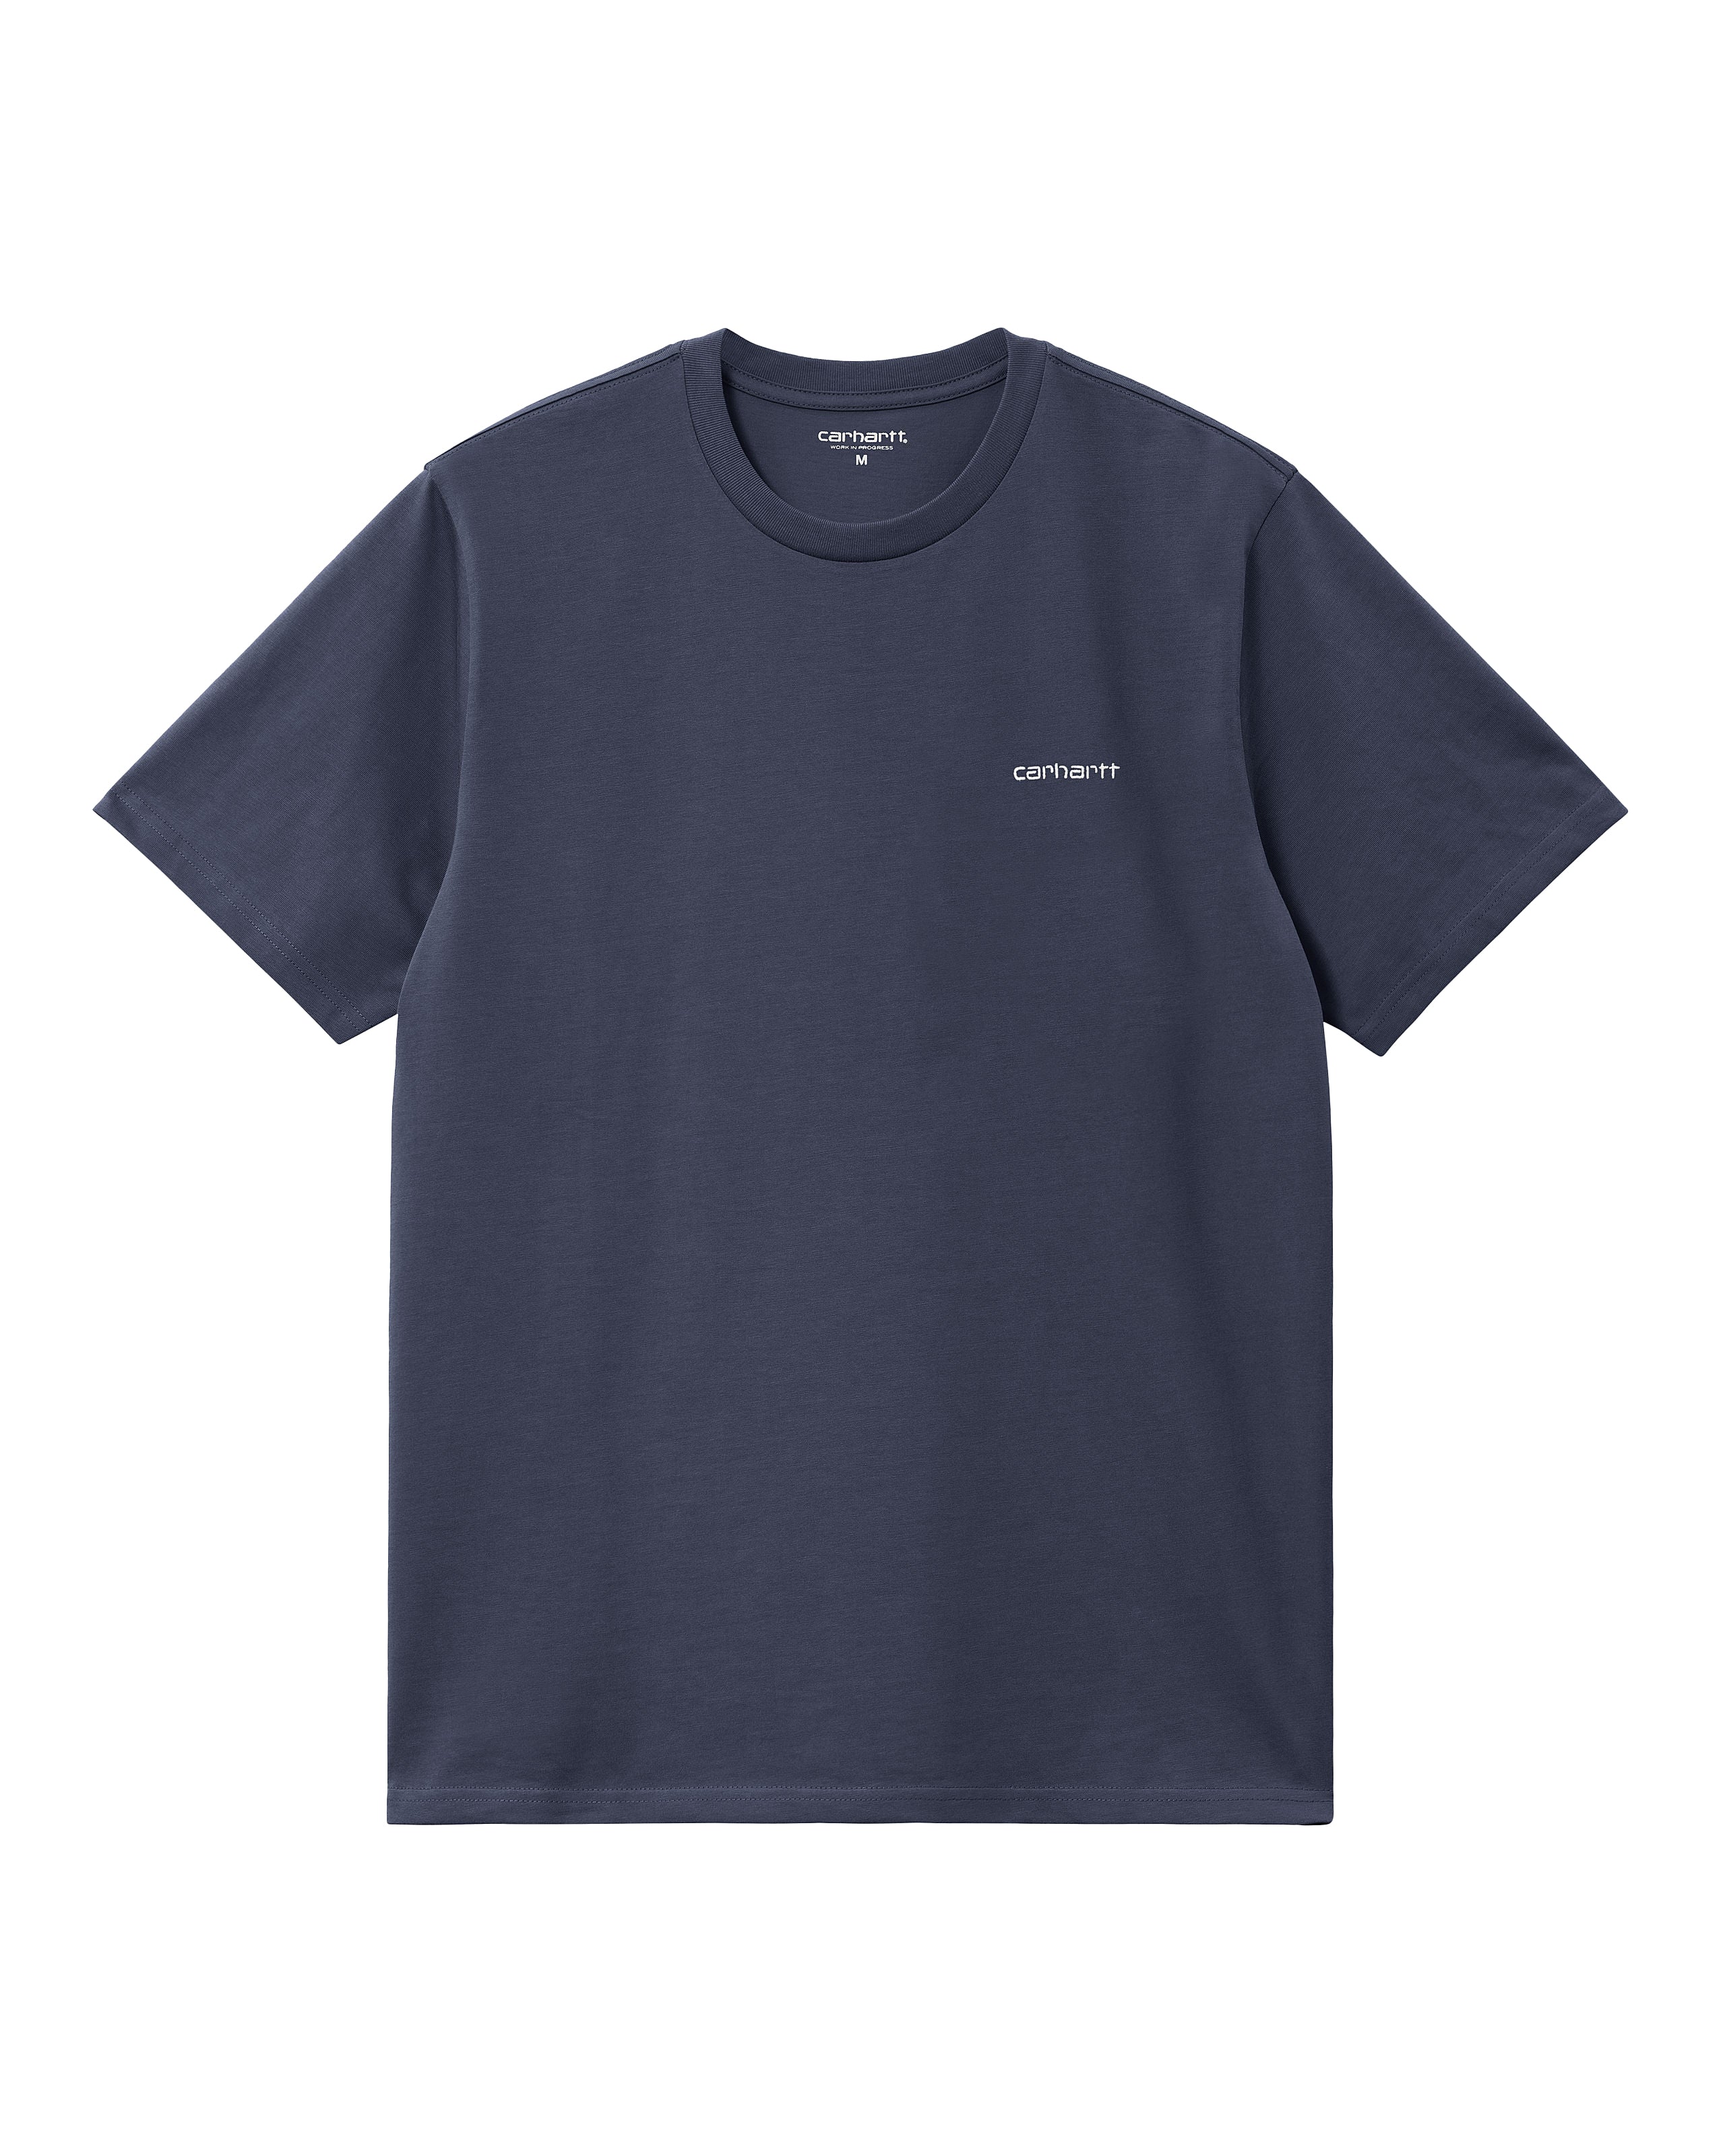 S/S Script Embroidery T-Shirt - Air force blue / White